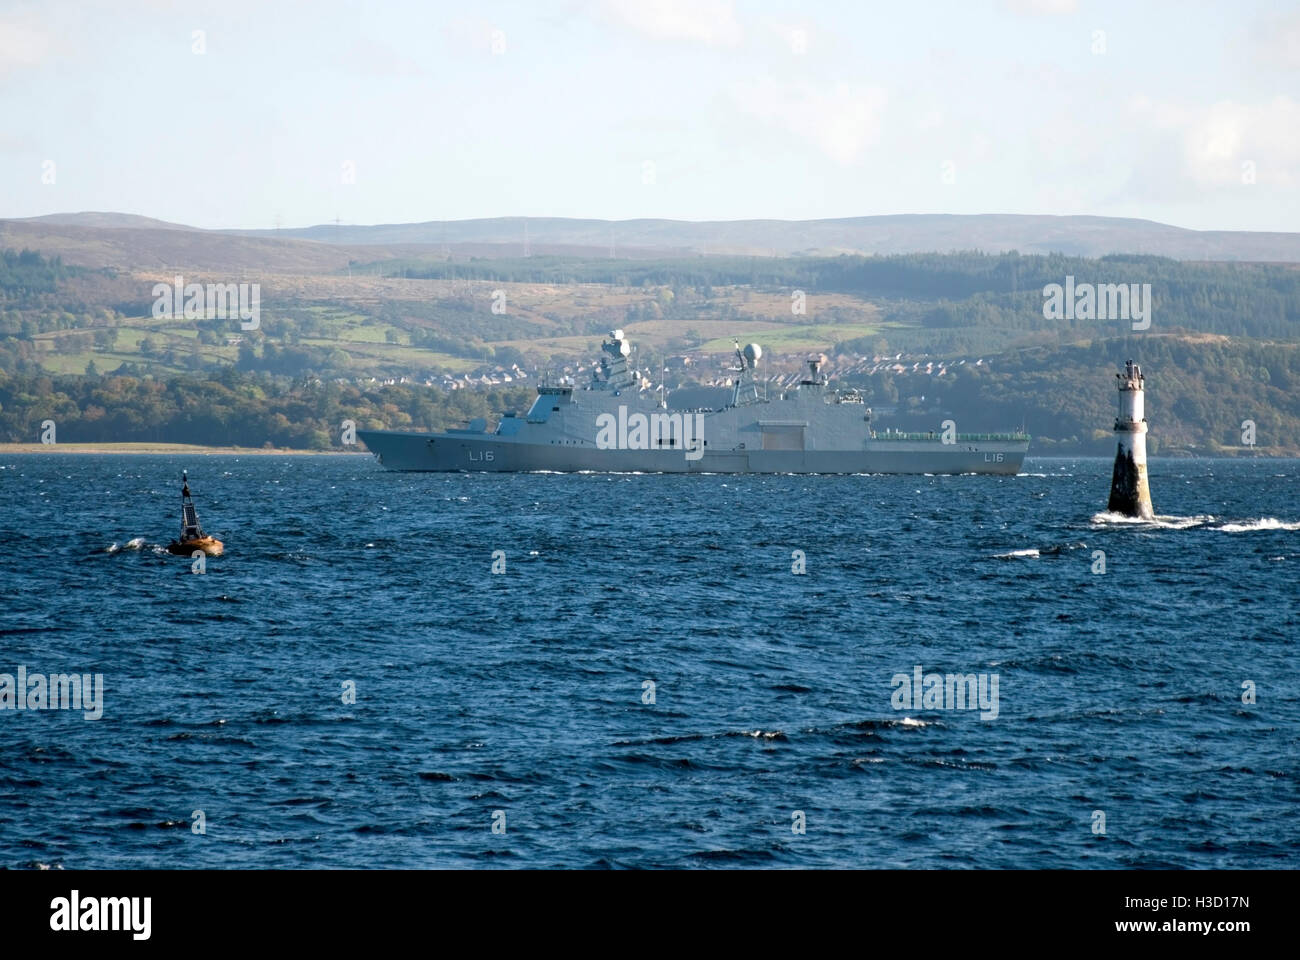 H.D.M.S. Absalom NATO L16 Warship River Clyde Scotland Stock Photo